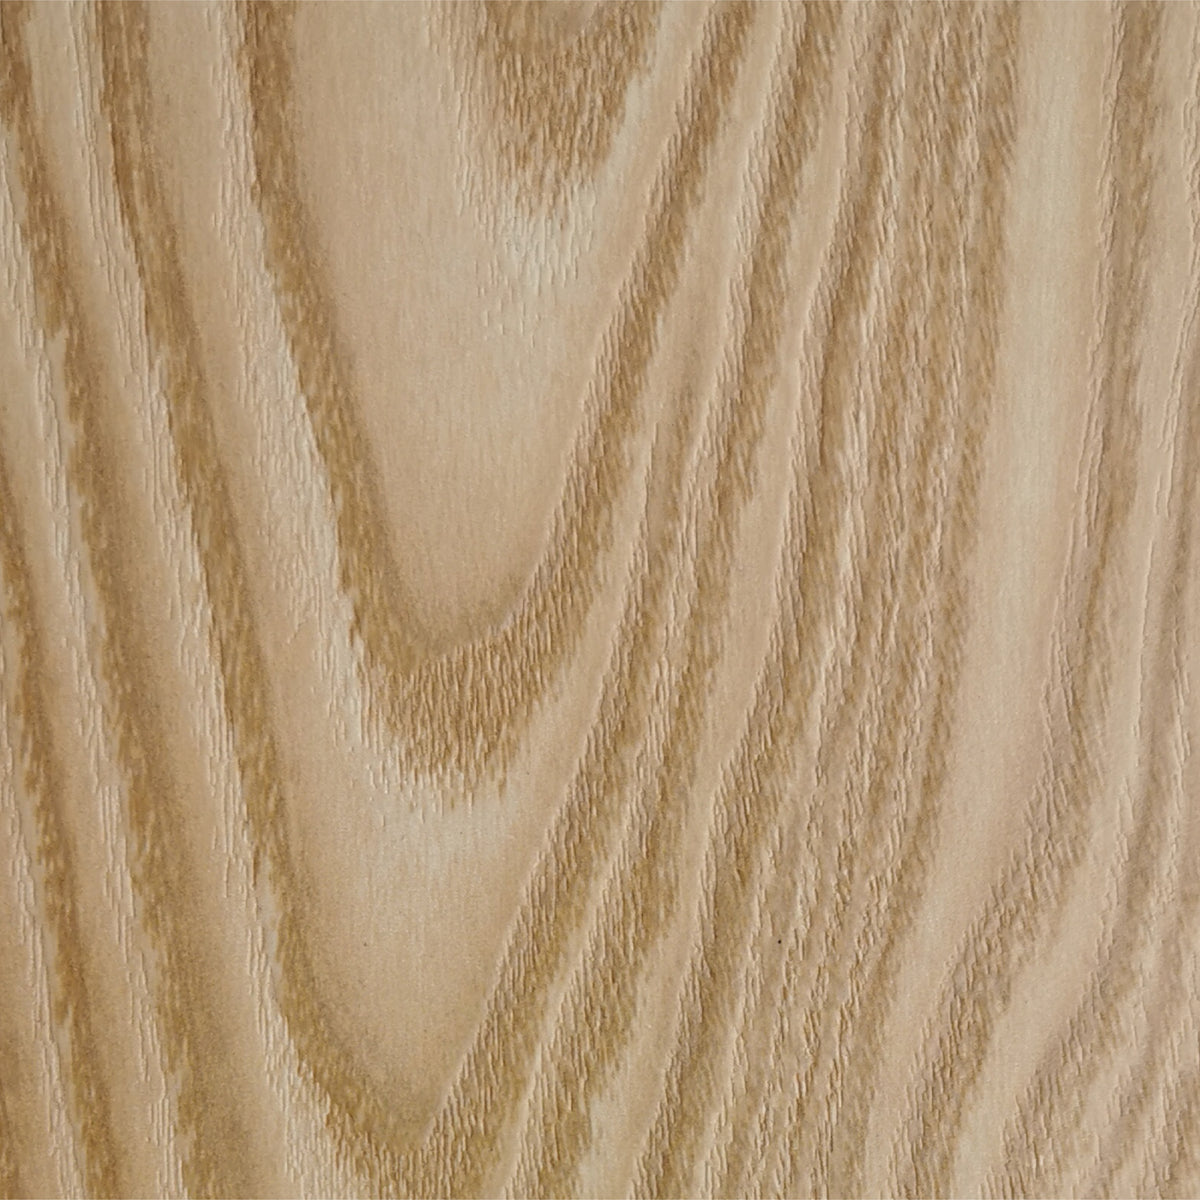 Timber Style Melamine Panel in Classic Oak 1220mmx2440mmx18mm